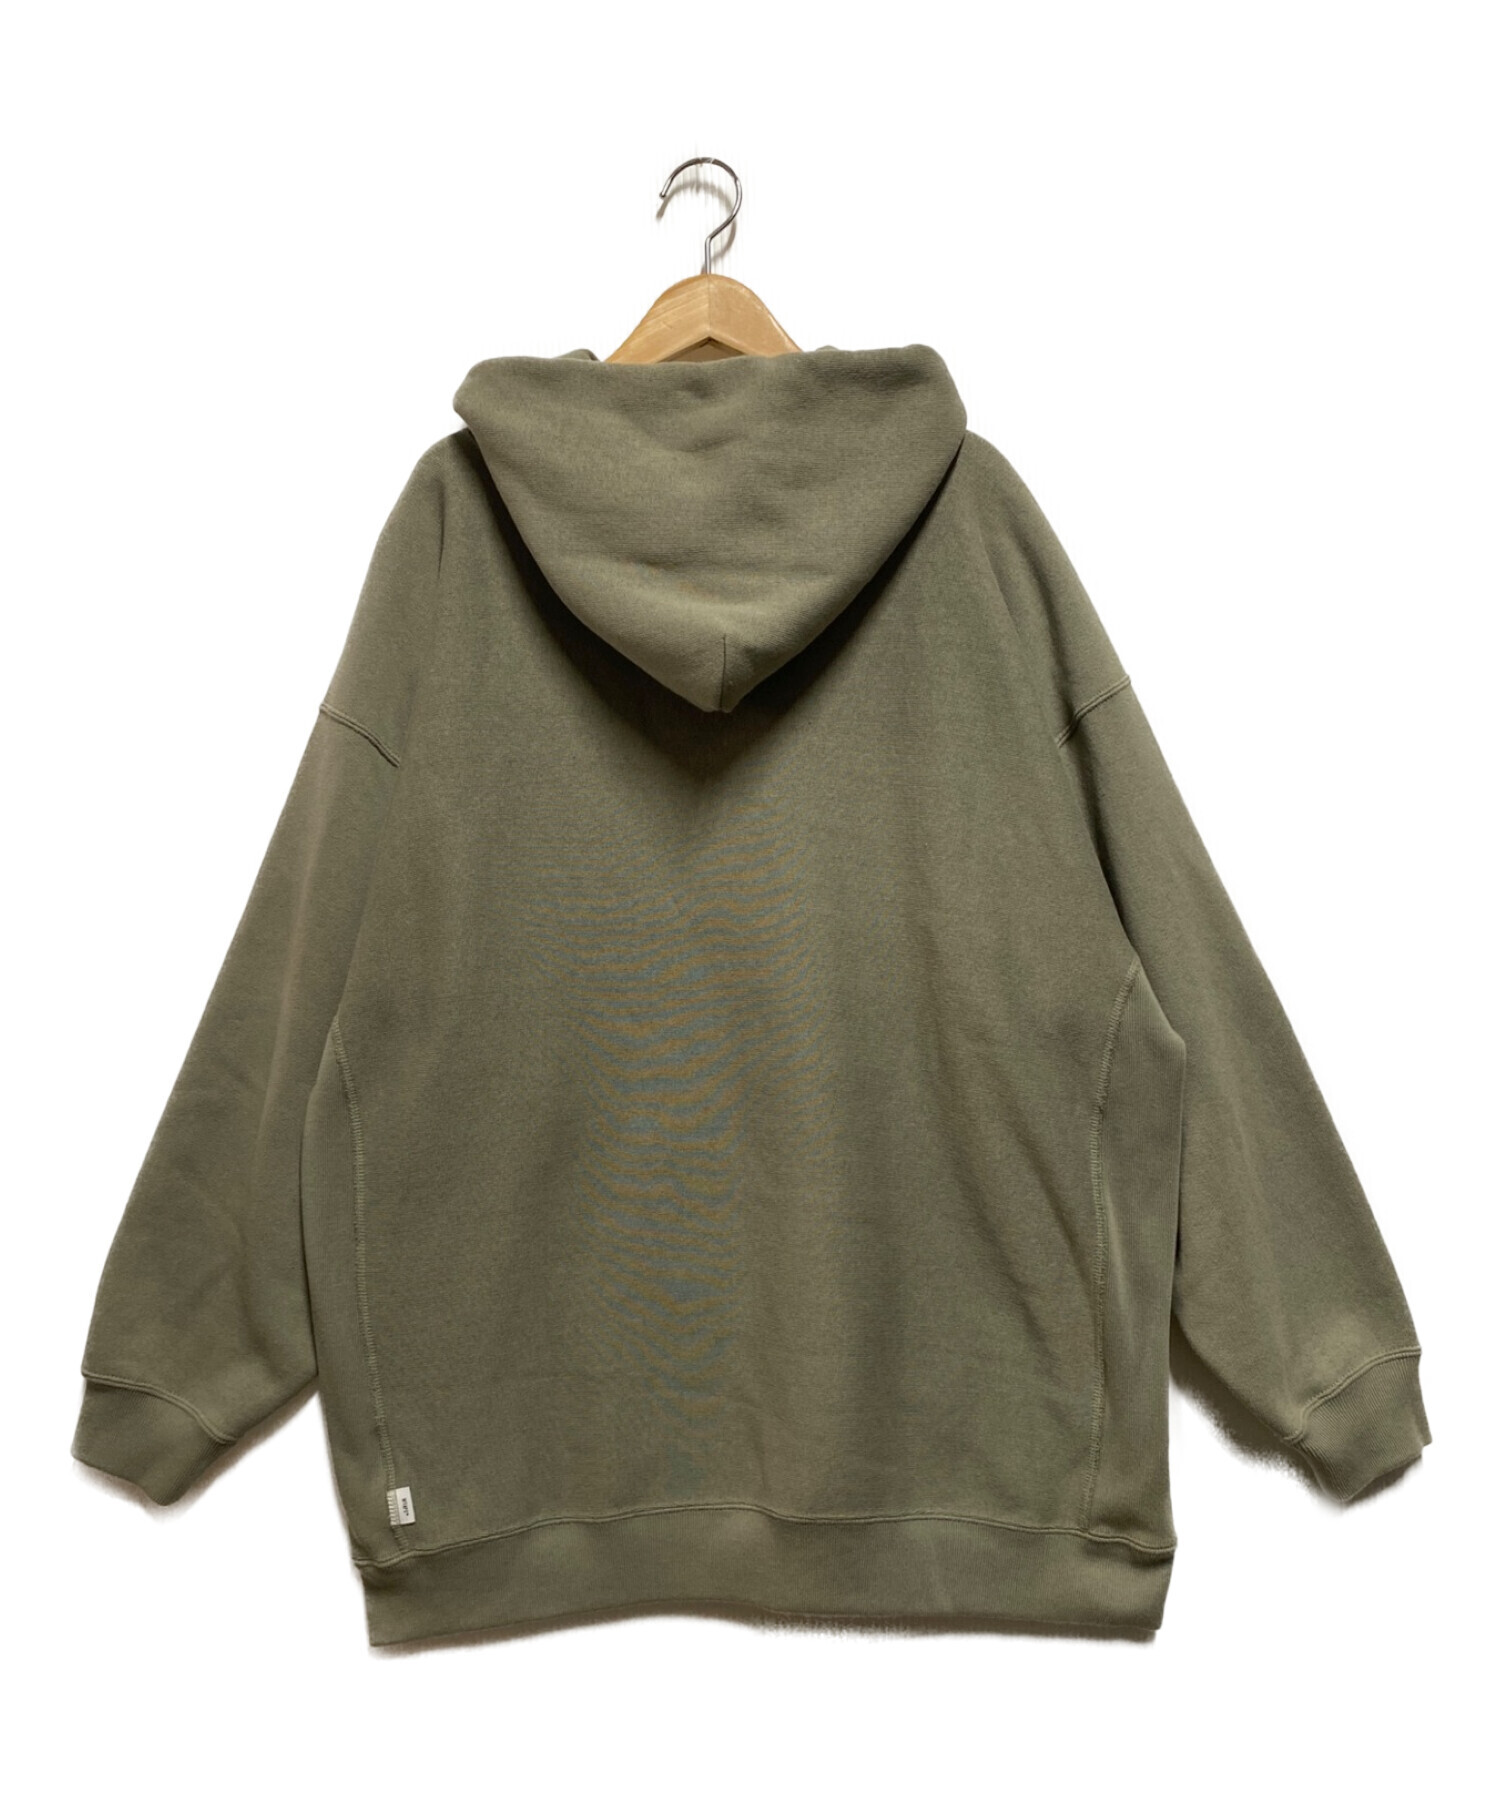 WTAPS × CHAMPION HOODED REVERSE WEAVE L